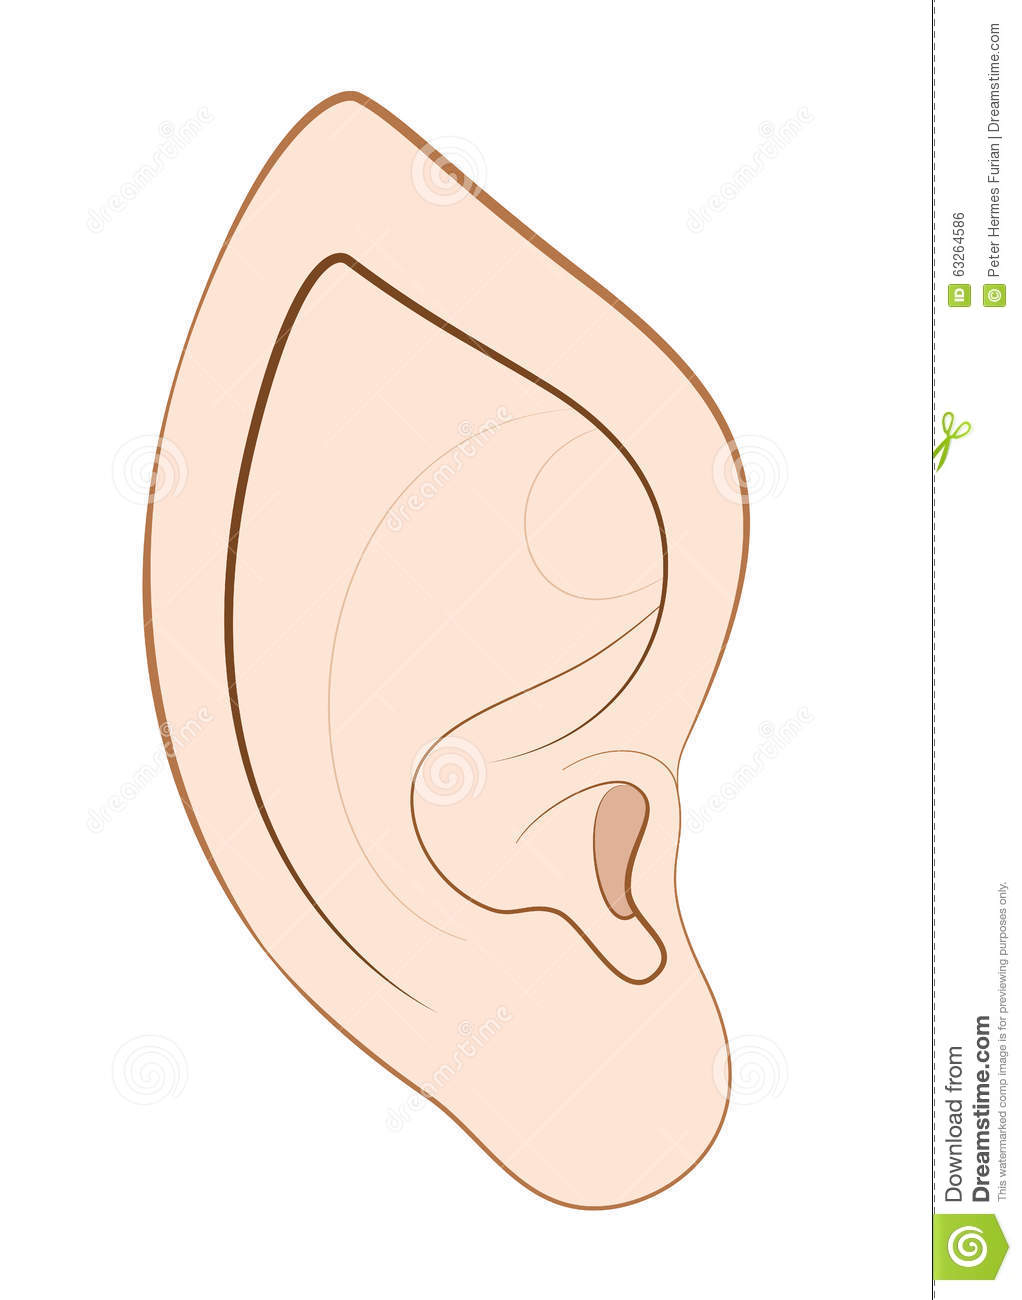 Pointed Ears clipart #20, Download drawings